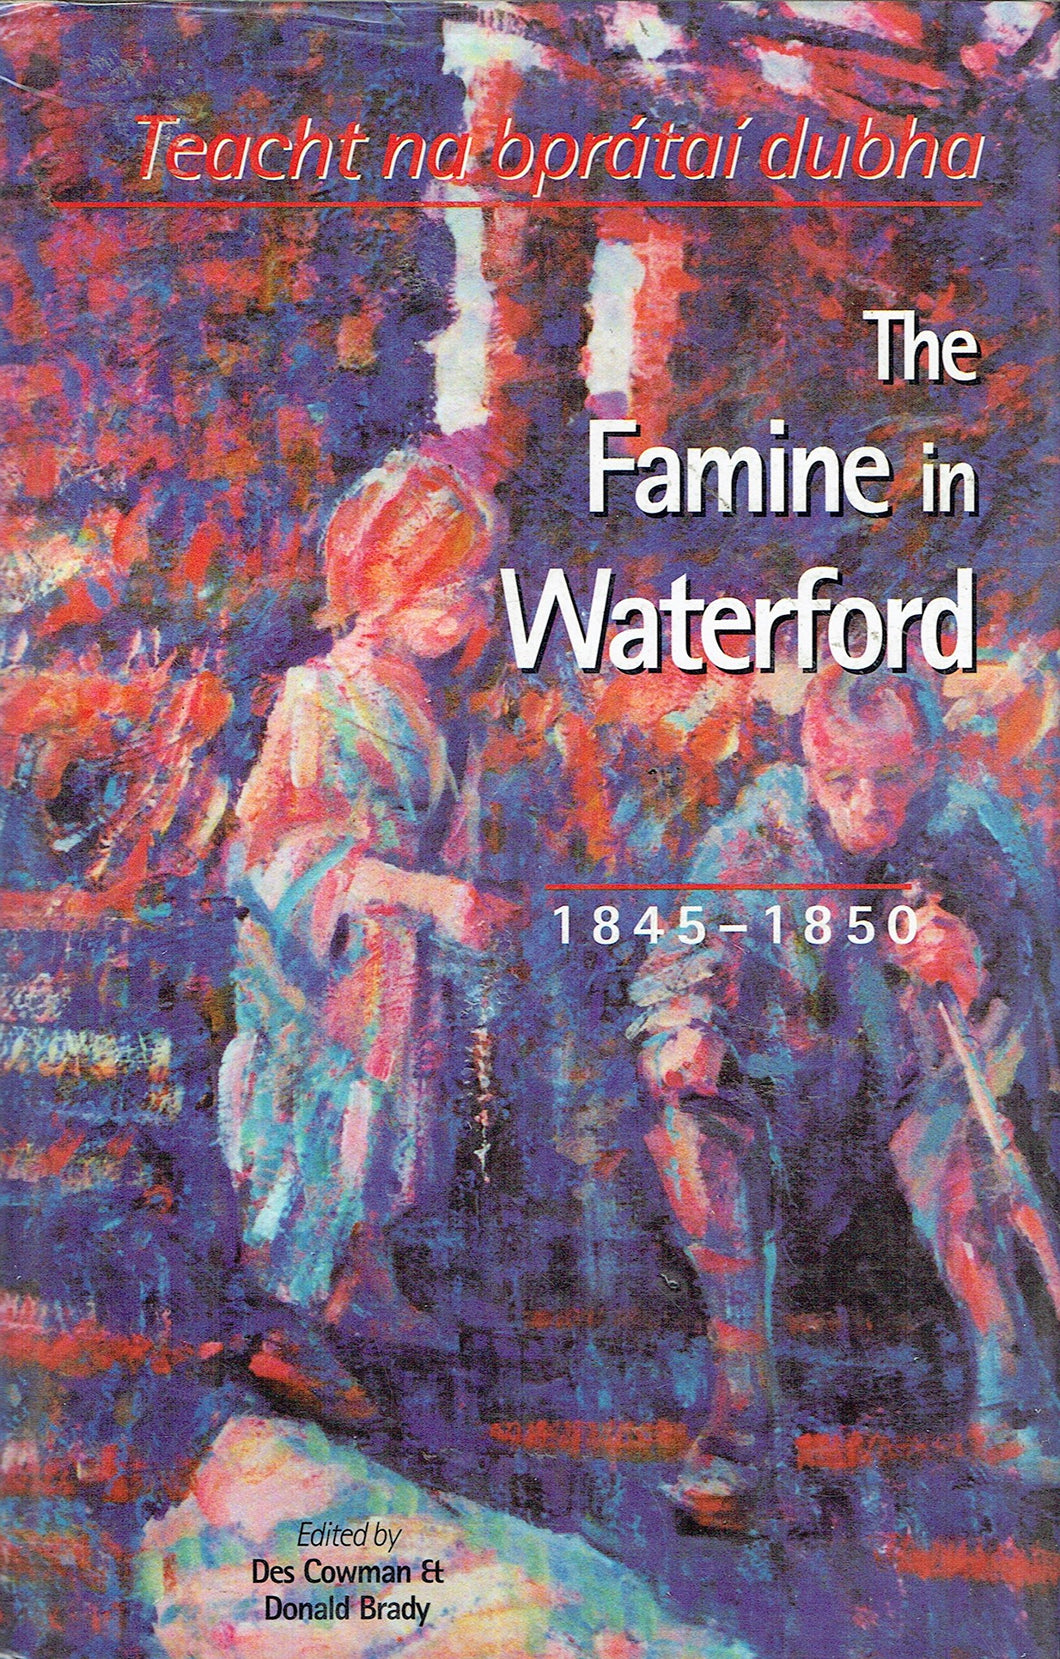 The Famine in Waterford: 1845-1850